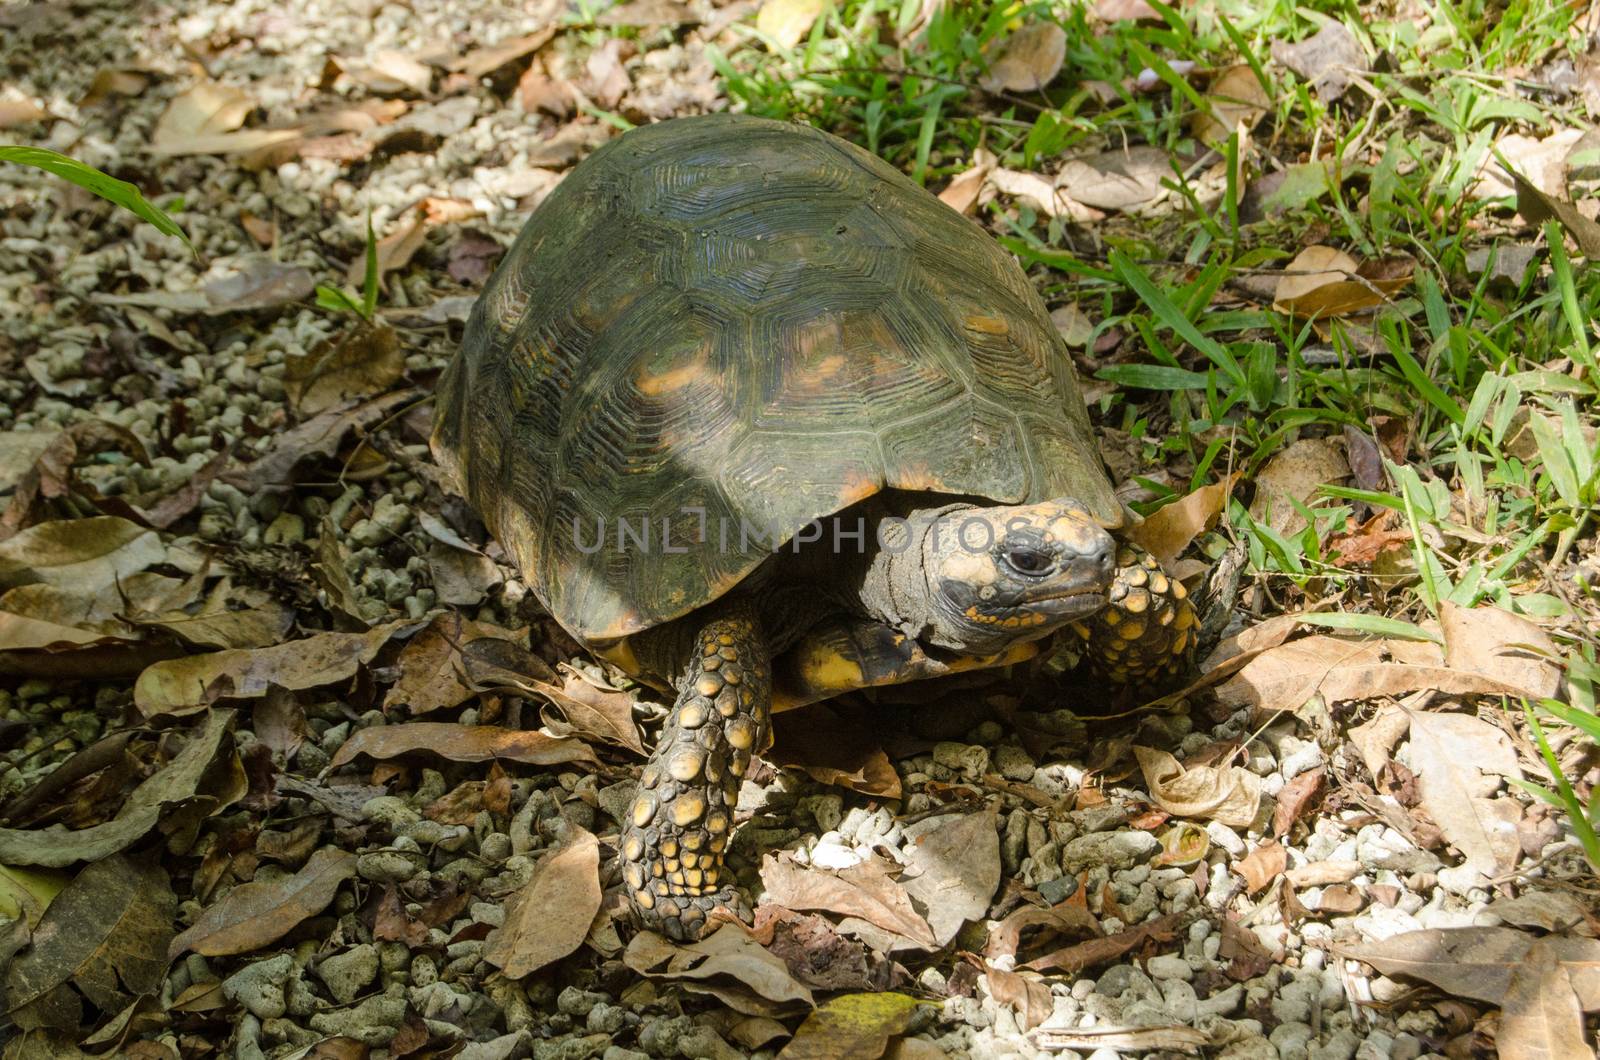 A yellow-footed tortoise walking on the forest floor in Tobago, Trinidad and Tobago.